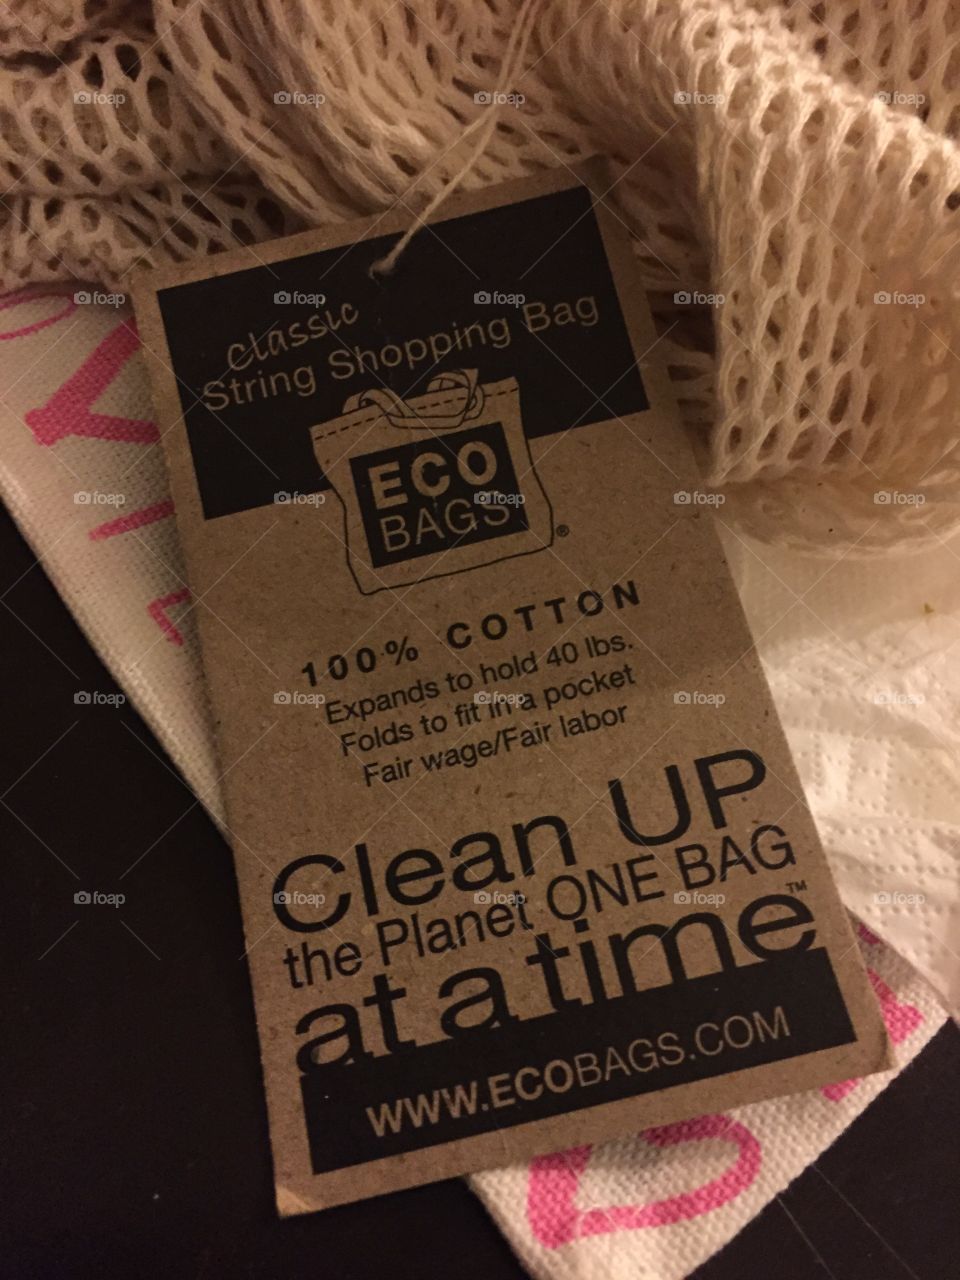 Eco bags for produce shopping reduce use of plastic one bag at a time. 100% cotton, fair trade. 